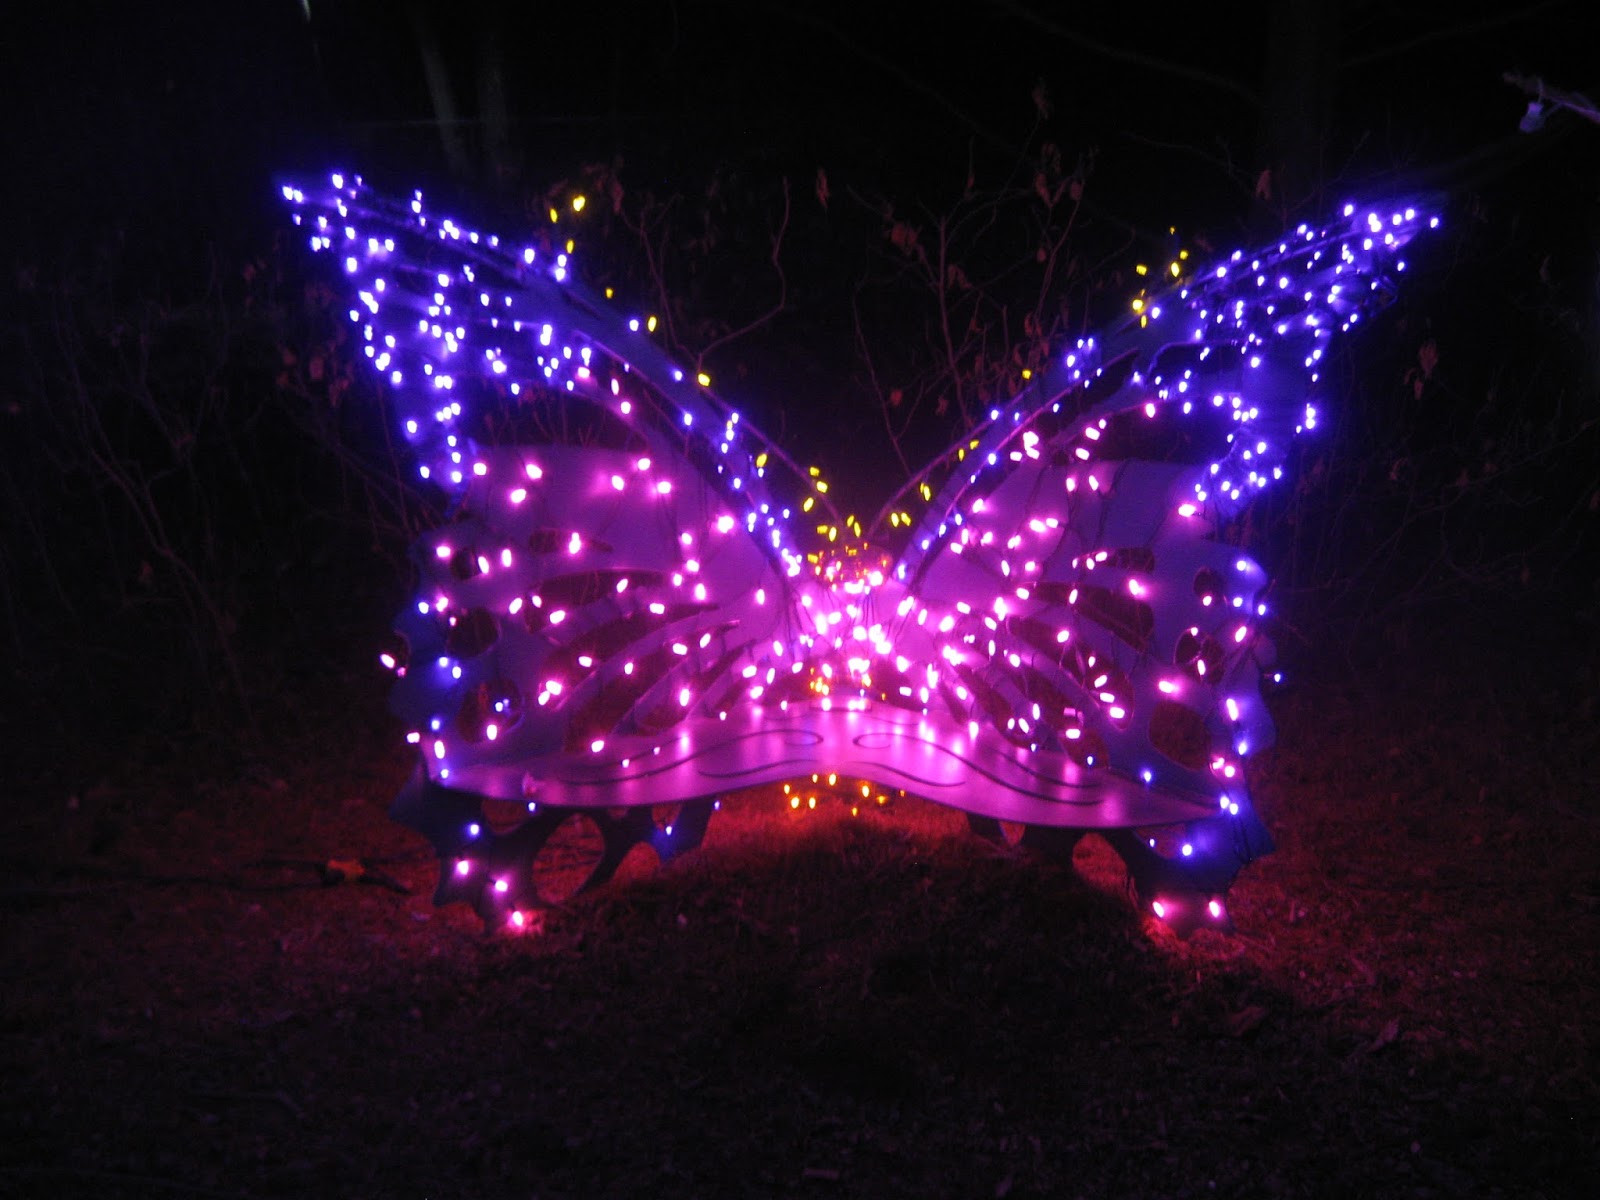 Washingtongardener Win A Pass To The Garden Of Lights At